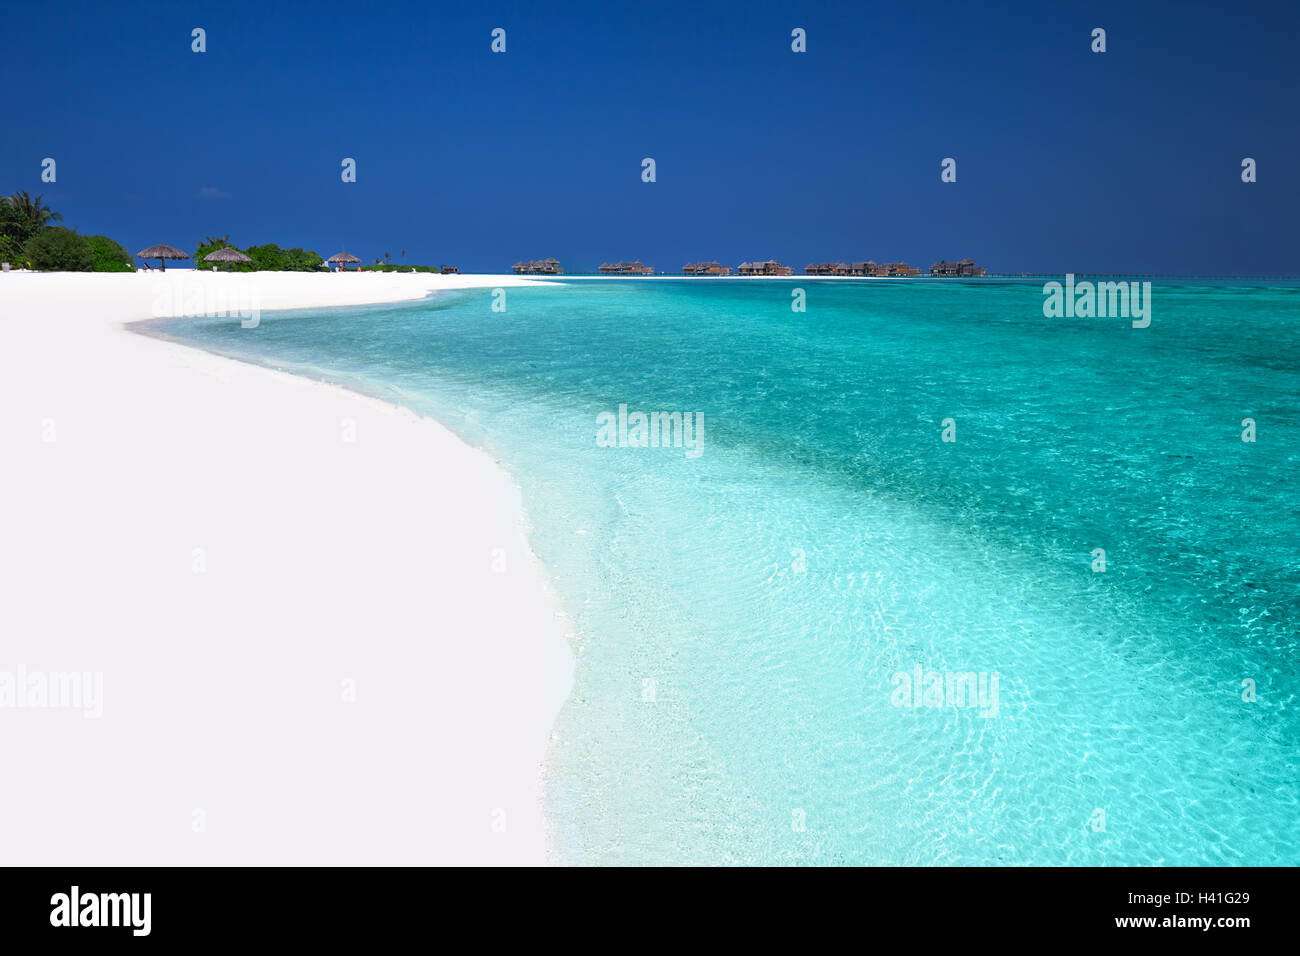 Tropical island with sandy beach, palm trees, overwater bungalows and turquoise clear water Stock Photo